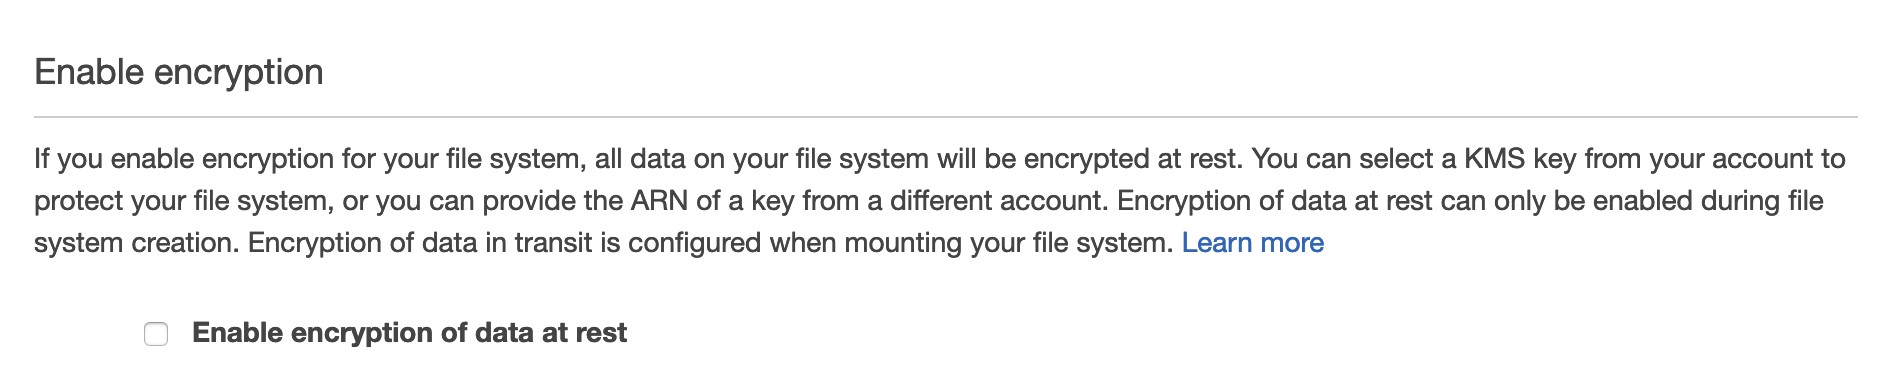 Enable encryption

If you enable encryption for your file system, all data on your file system will be encrypted at rest. You can select a KMS key from your account to
protect your file system, or you can provide the ARN of a key from a different account. Encryption of data at rest can only be enabled during file
system creation. Encryption of data in transit is configured when mounting your file system. Learn more

Enable encryption of data at rest